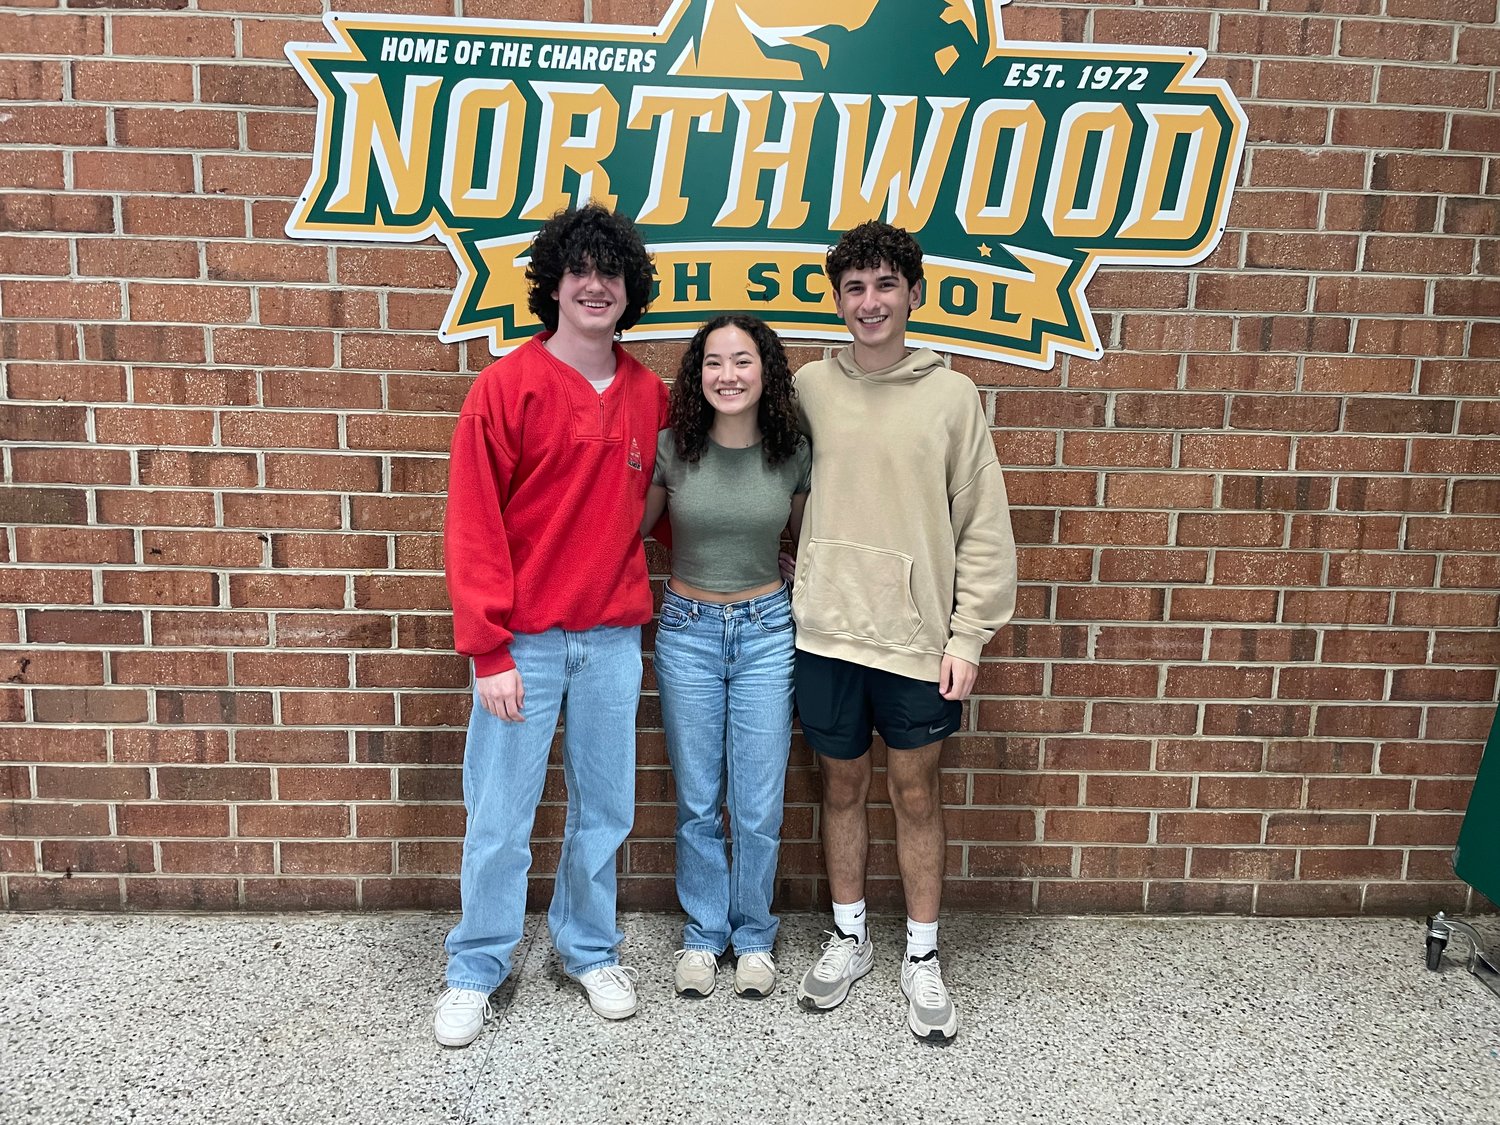 Northwood High School seniors Scott Oglesbee, left, Revy Godehn, center, and Gio Cacciato, right, are leaders of the Chatham Youth Atkins Scholarship. The scholarship hopes to provide at least $2,500 toward college for an underprivileged student in the county.